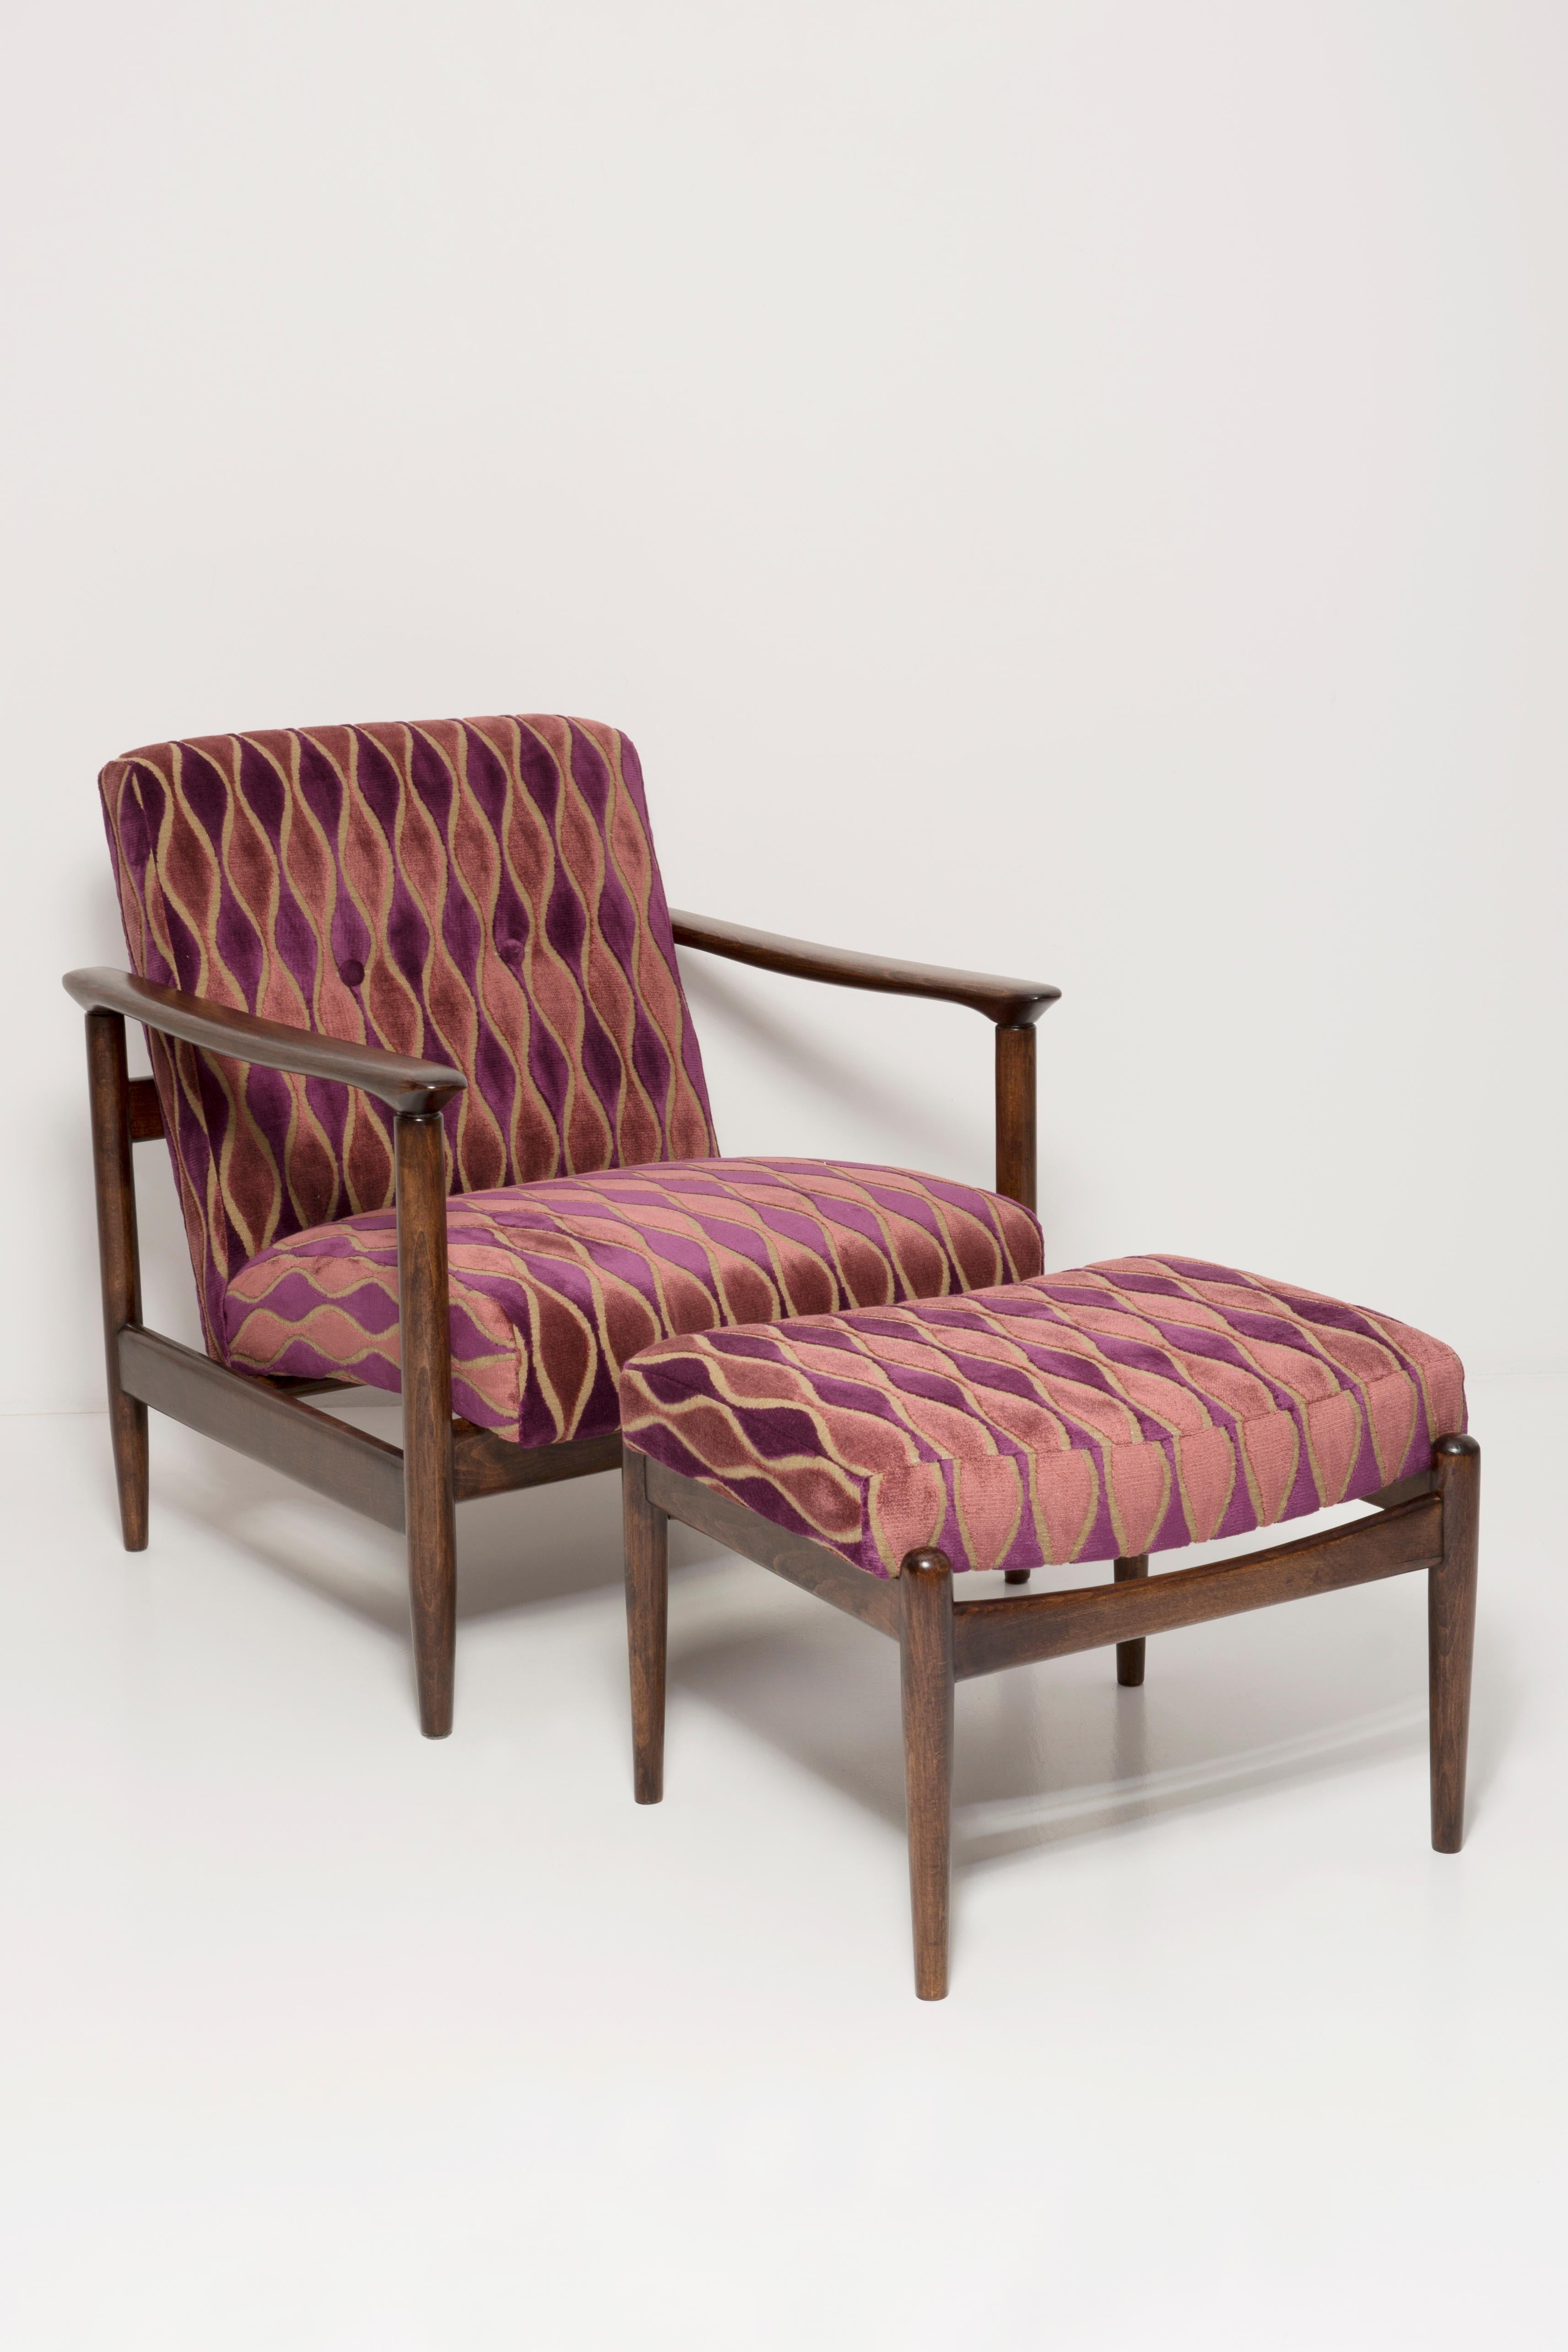 Beautiful pattern pink and violet velvet Armchair GFM-142, designed by Edmund Homa, a polish architect, designer of Industrial Design and interior architecture, professor at the Academy of Fine Arts in Gdansk. 

The armchair was made in the 1960s